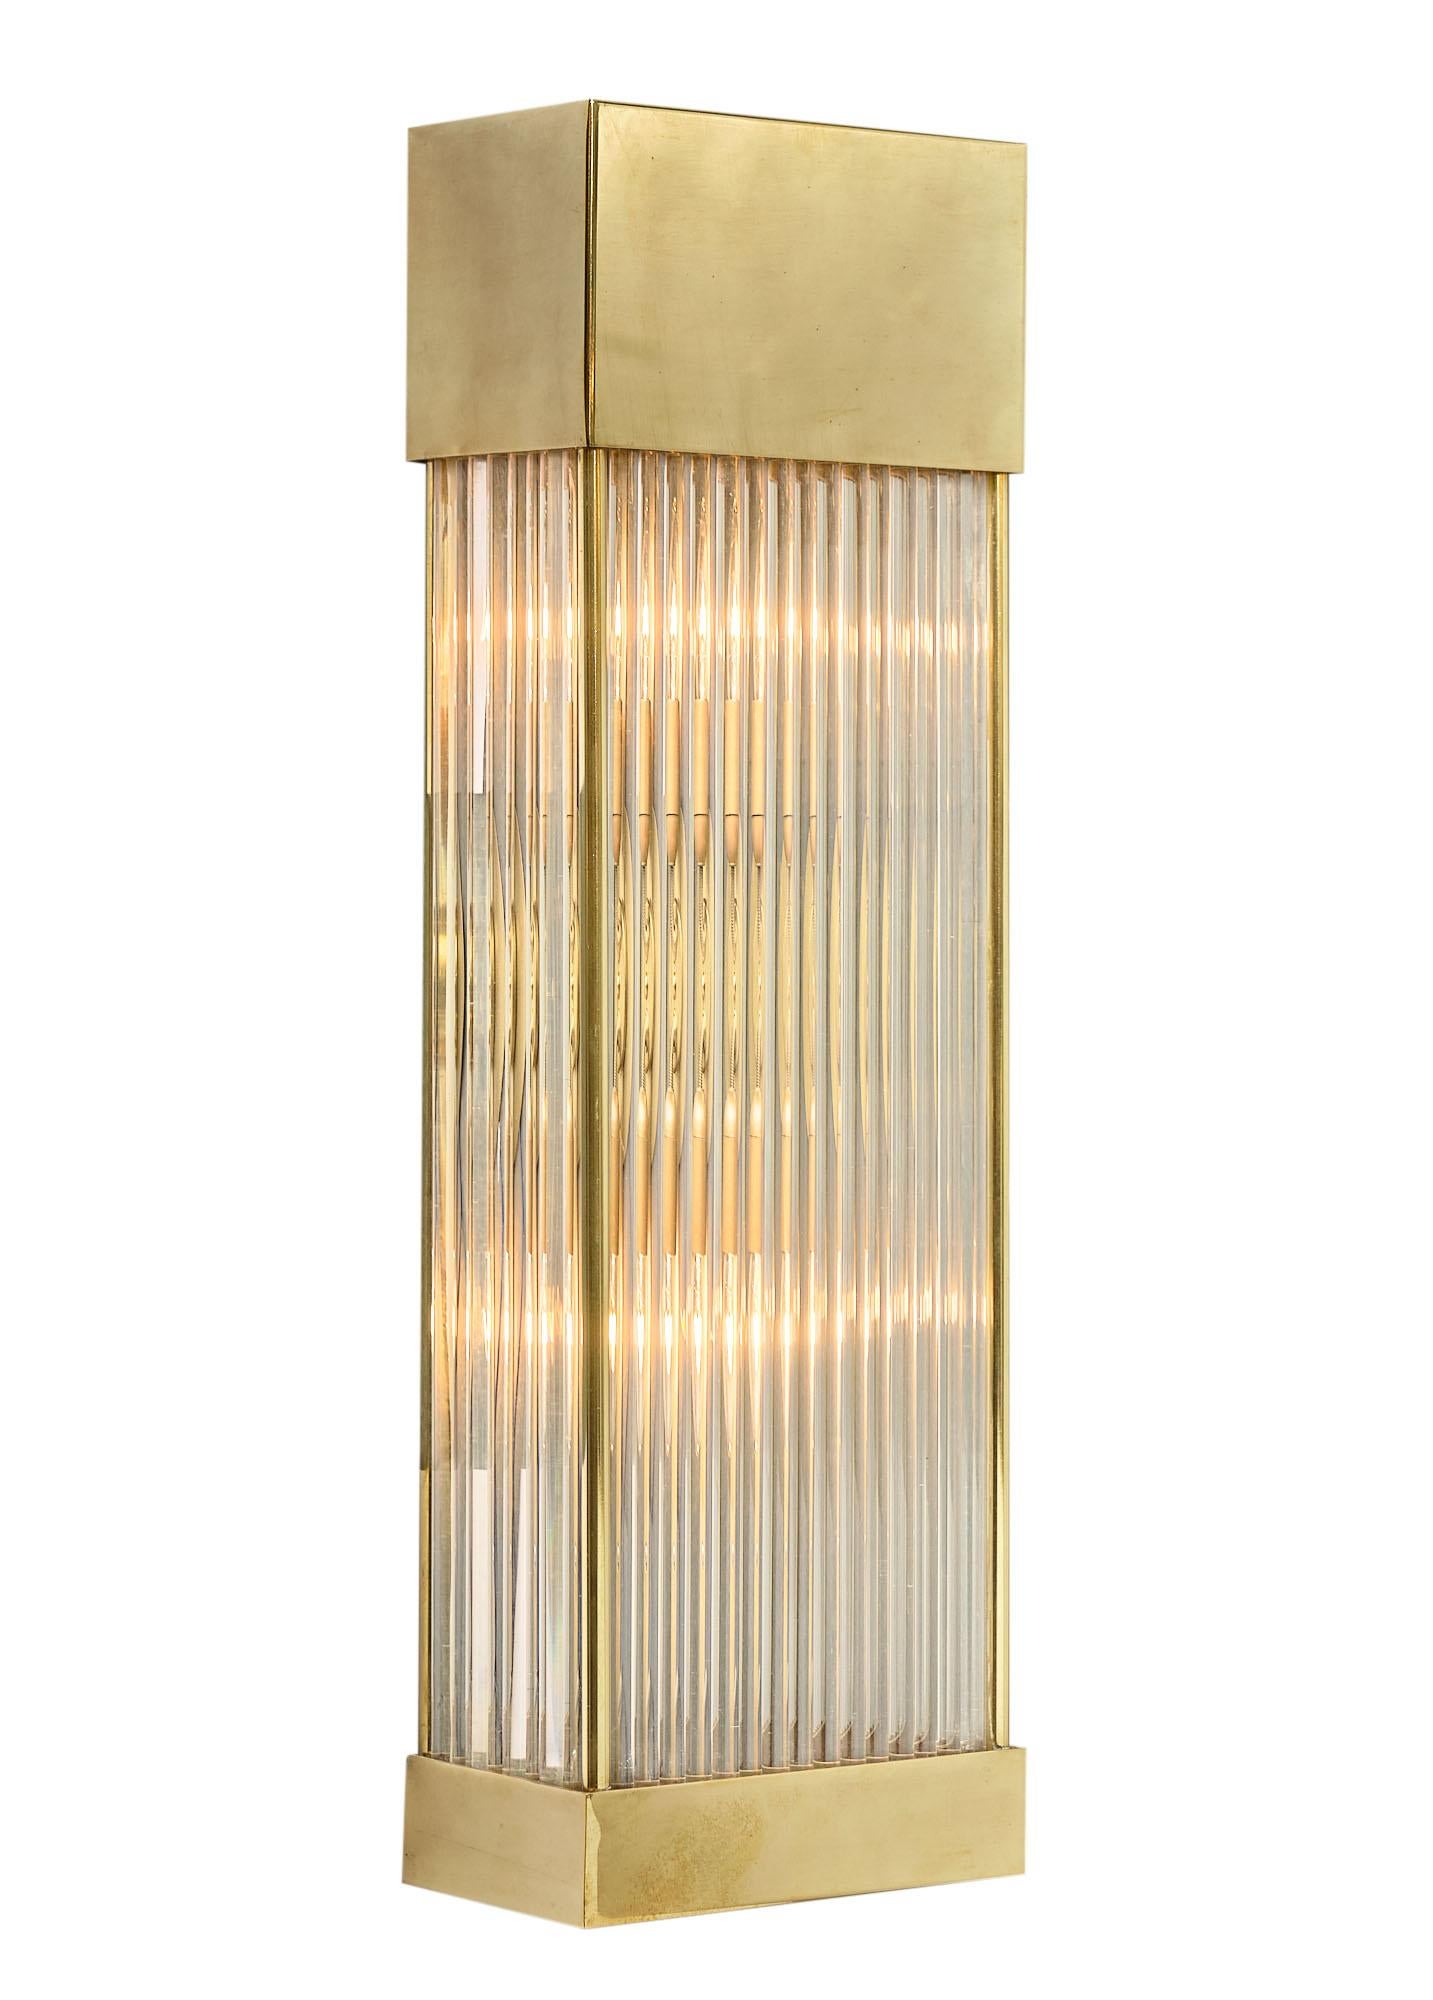 Pair of sconces from Murano, Italy featuring an array of glass rods maintained in bottom and top brass casings. This pair has been newly wired to fit US standards.

This pair is currently located at our dealer's warehouse in Italy. Please contact us